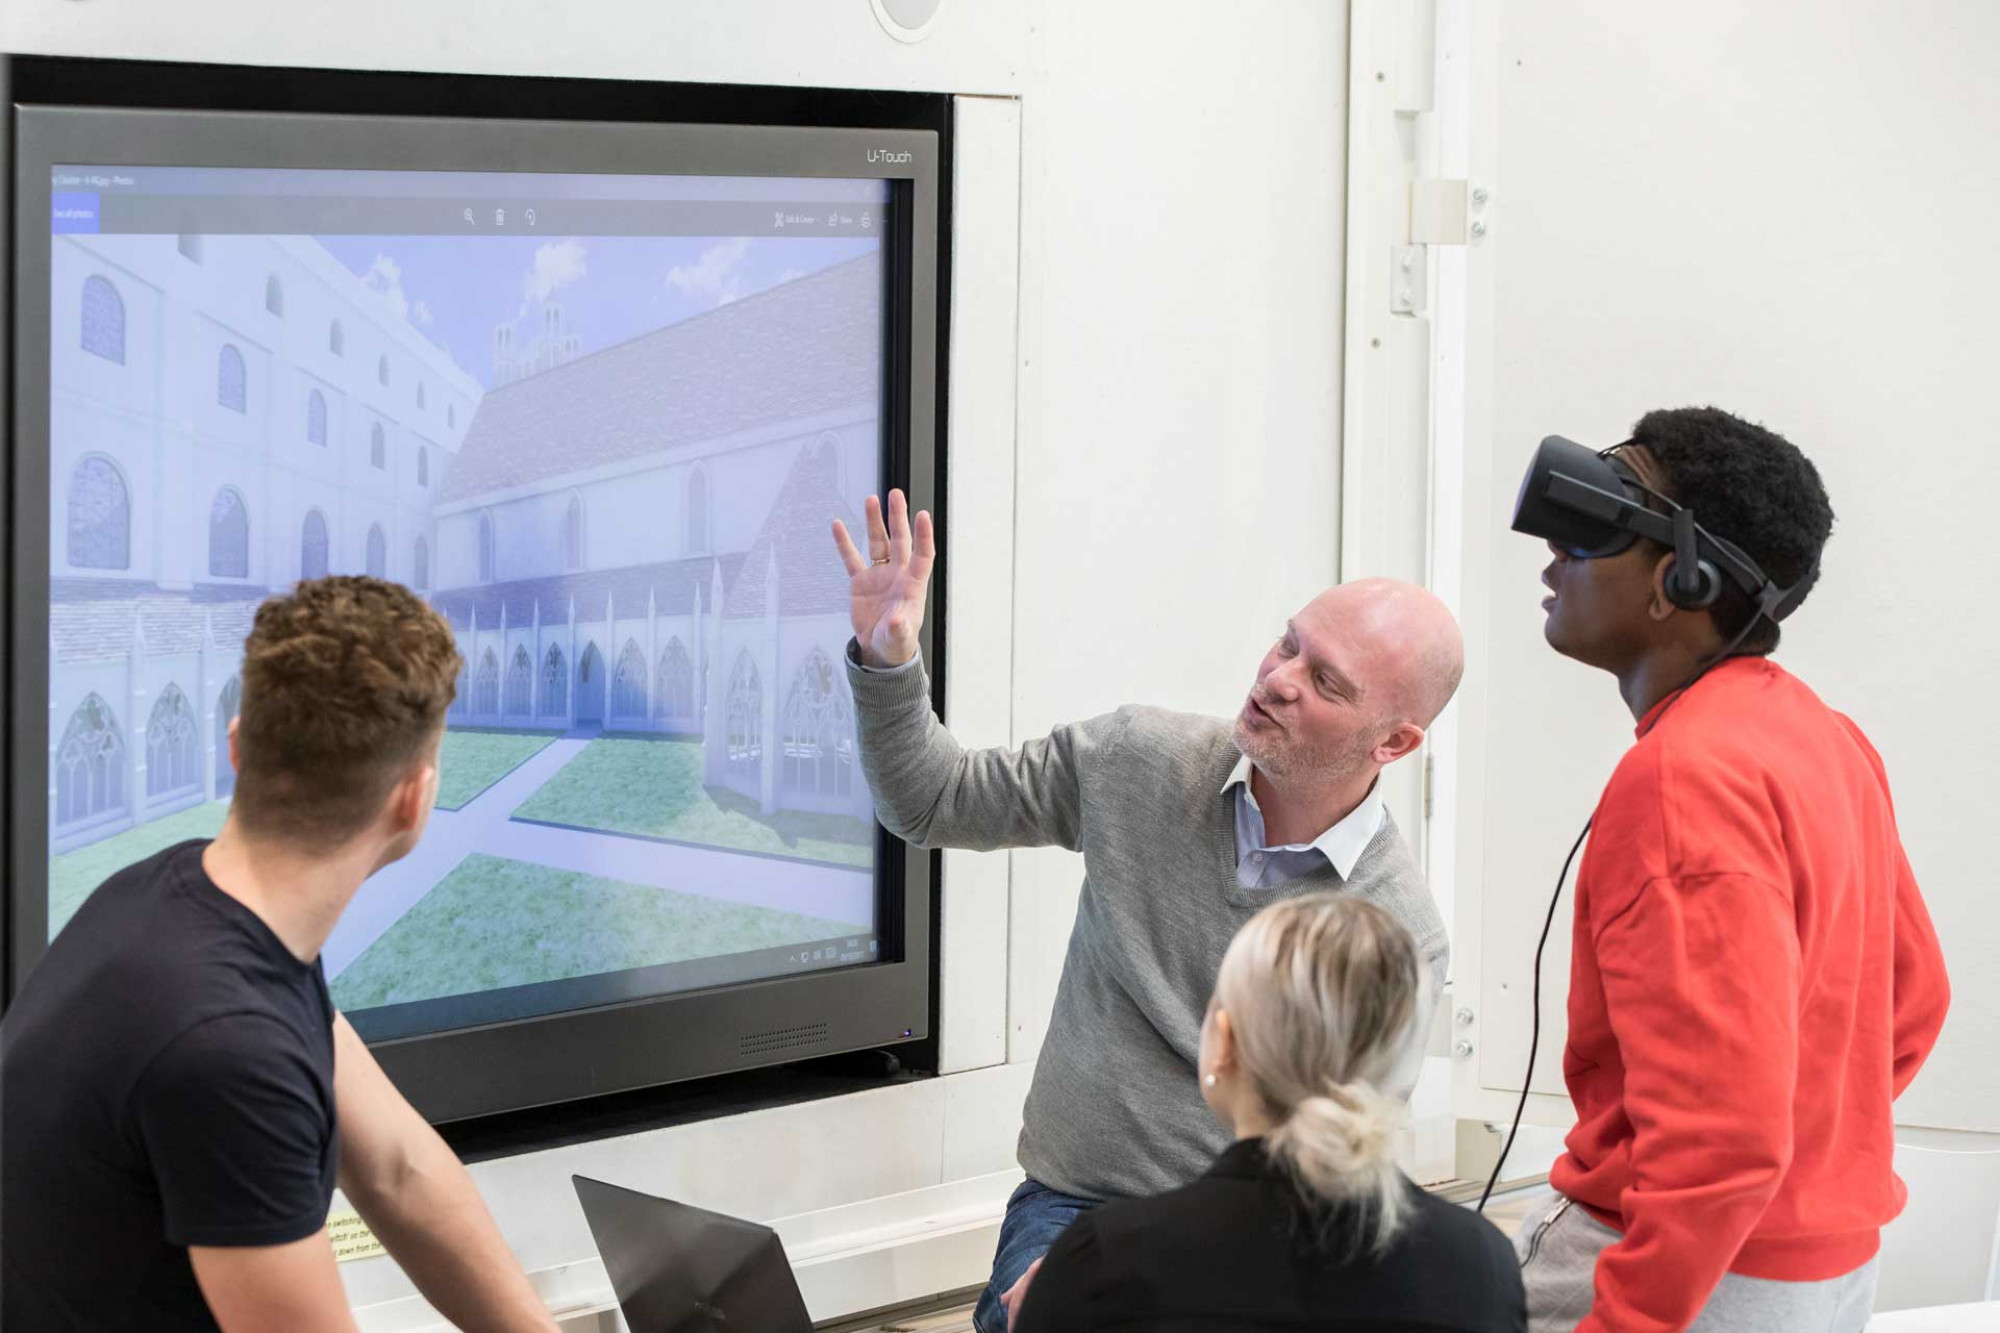 Architecture academic works with students using virtual reality headset